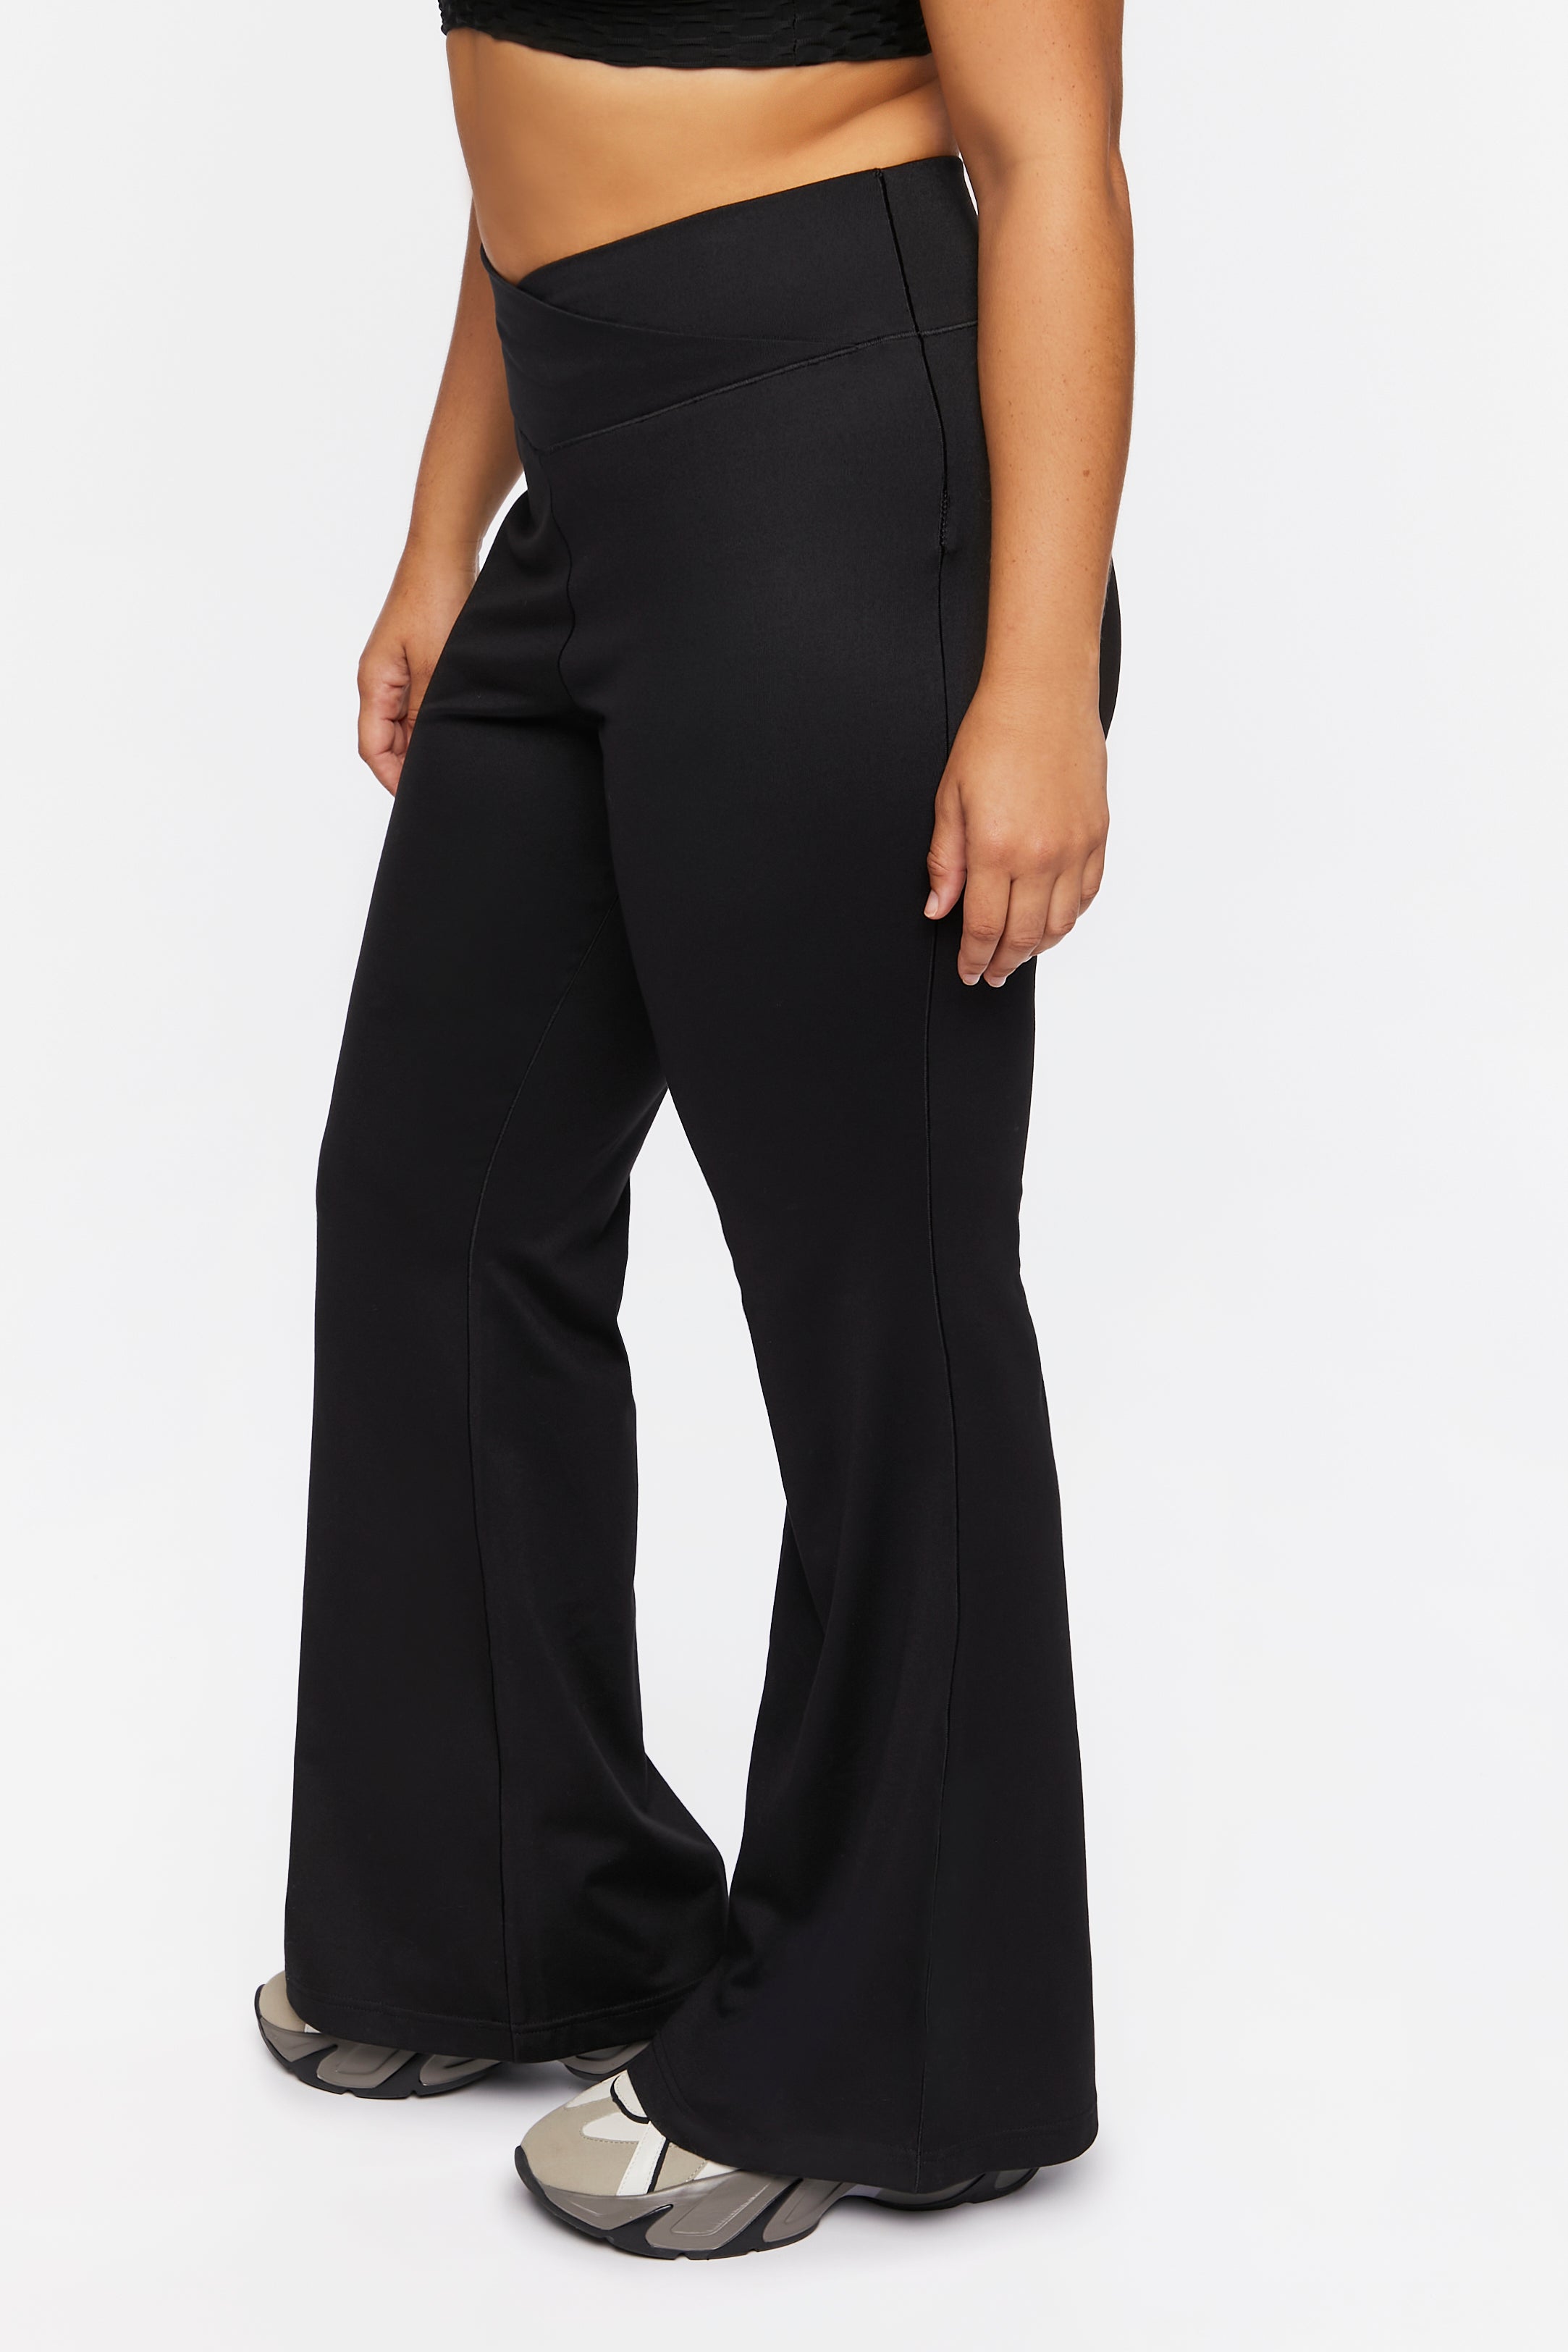 Black Plus Size Crossover Flare Pants 3